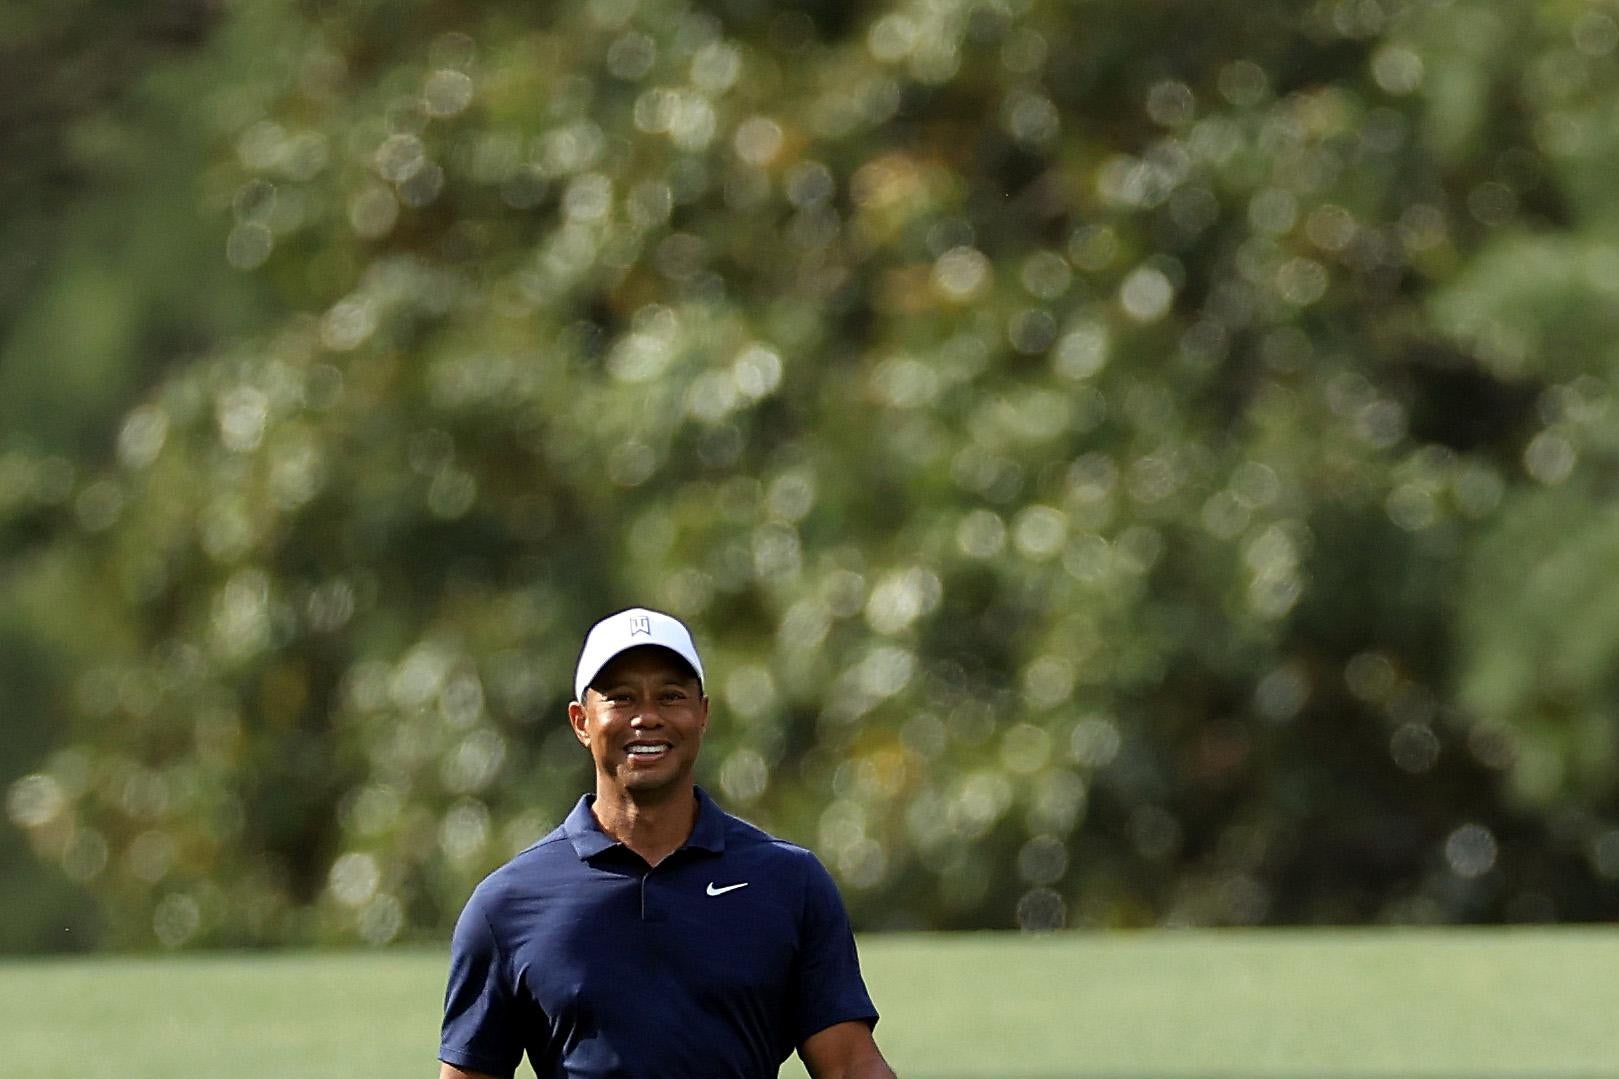 Woods walking and smiling, club in his right hand